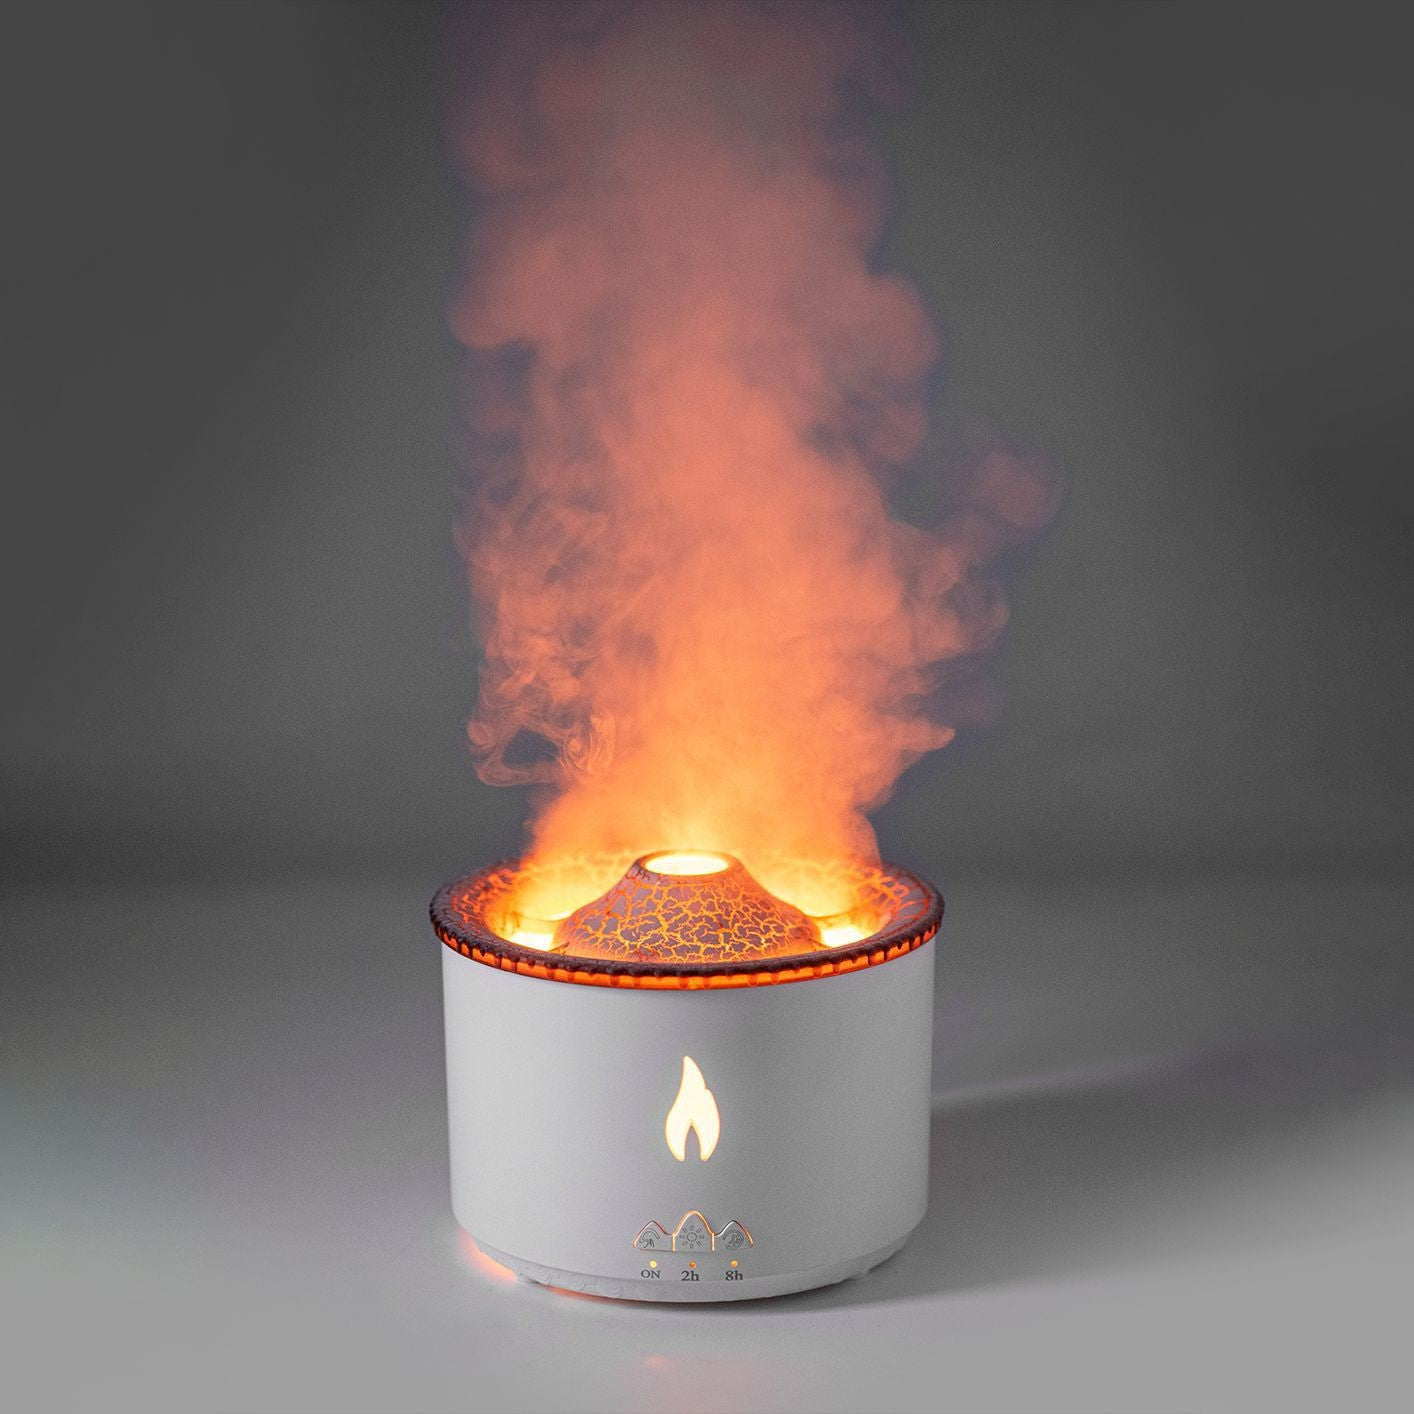 Black Friday Limited Time Sale 70% OFF🔥Volcano Aroma Diffuser Humidifier